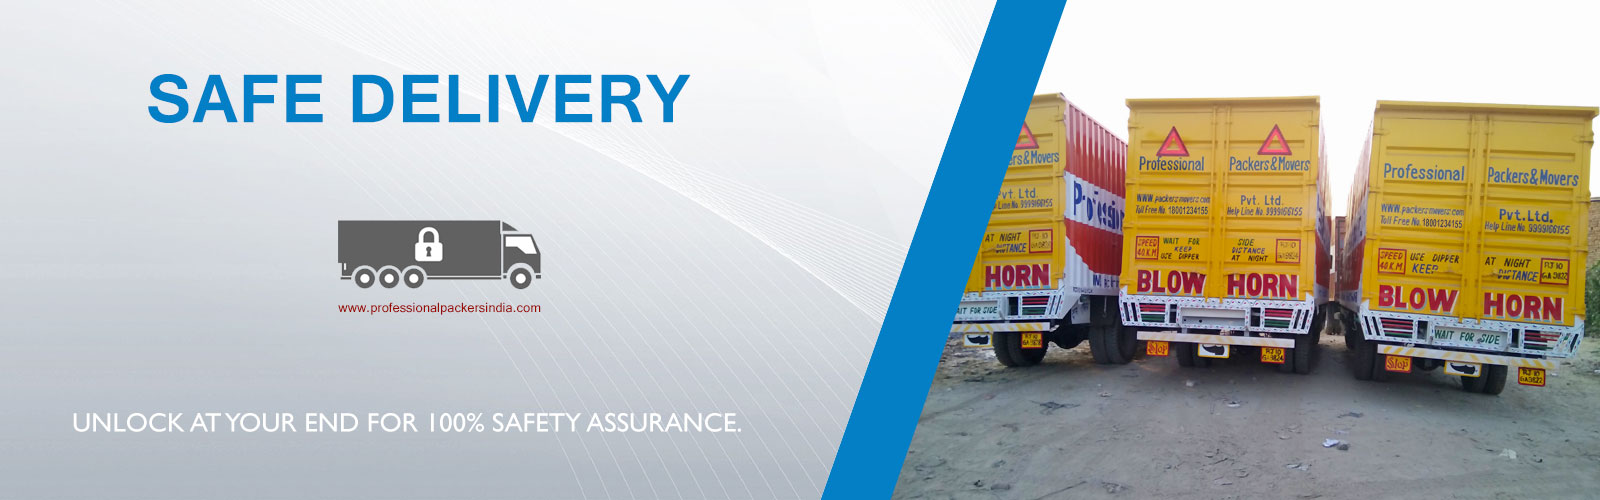 Movers Packers Zirakpur Punjab company move your belongings fast and in an efficient manner by integrating top-notch packaging material, dedicated staff and global-class technology.